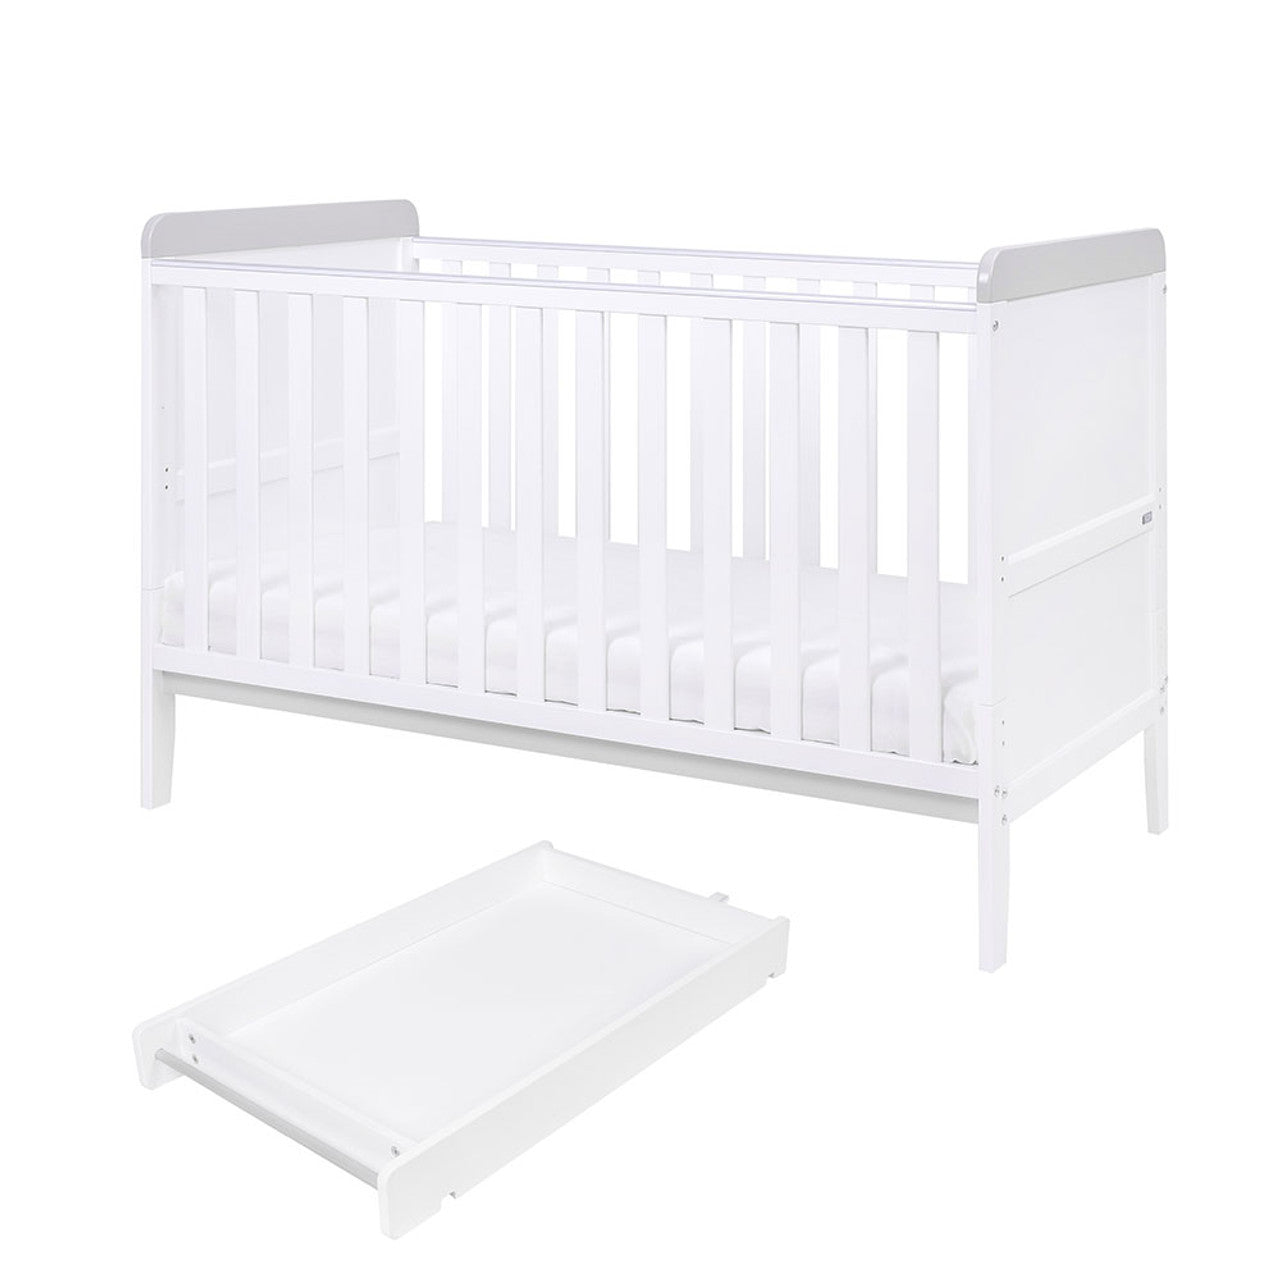 Tutti Bambini Rio Cot Bed with Cot Top Changer & Mattress - White/Dove Grey -  | For Your Little One